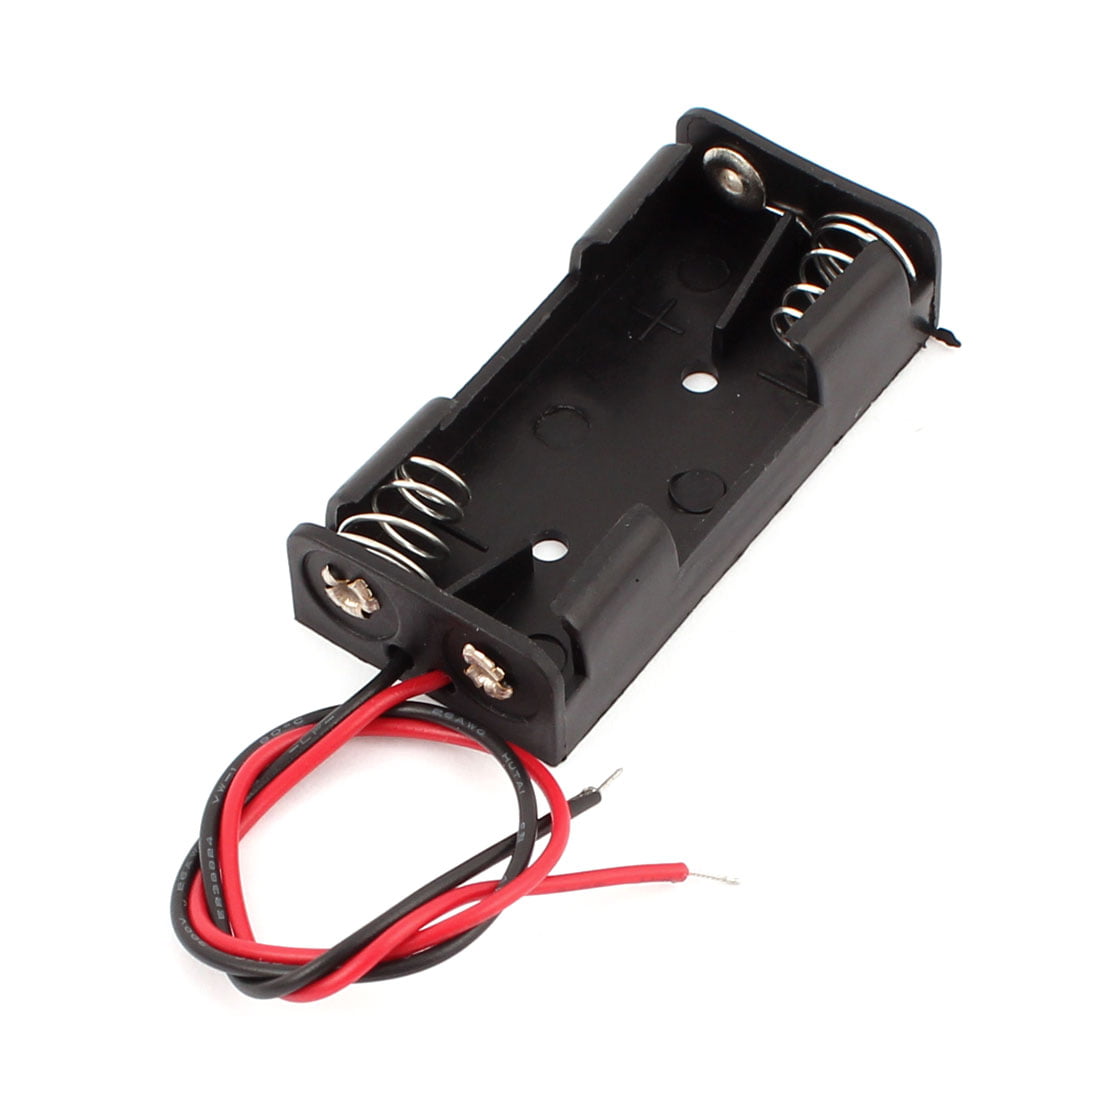 AAA x 2 Battery Holder Enclosed Box With Switch